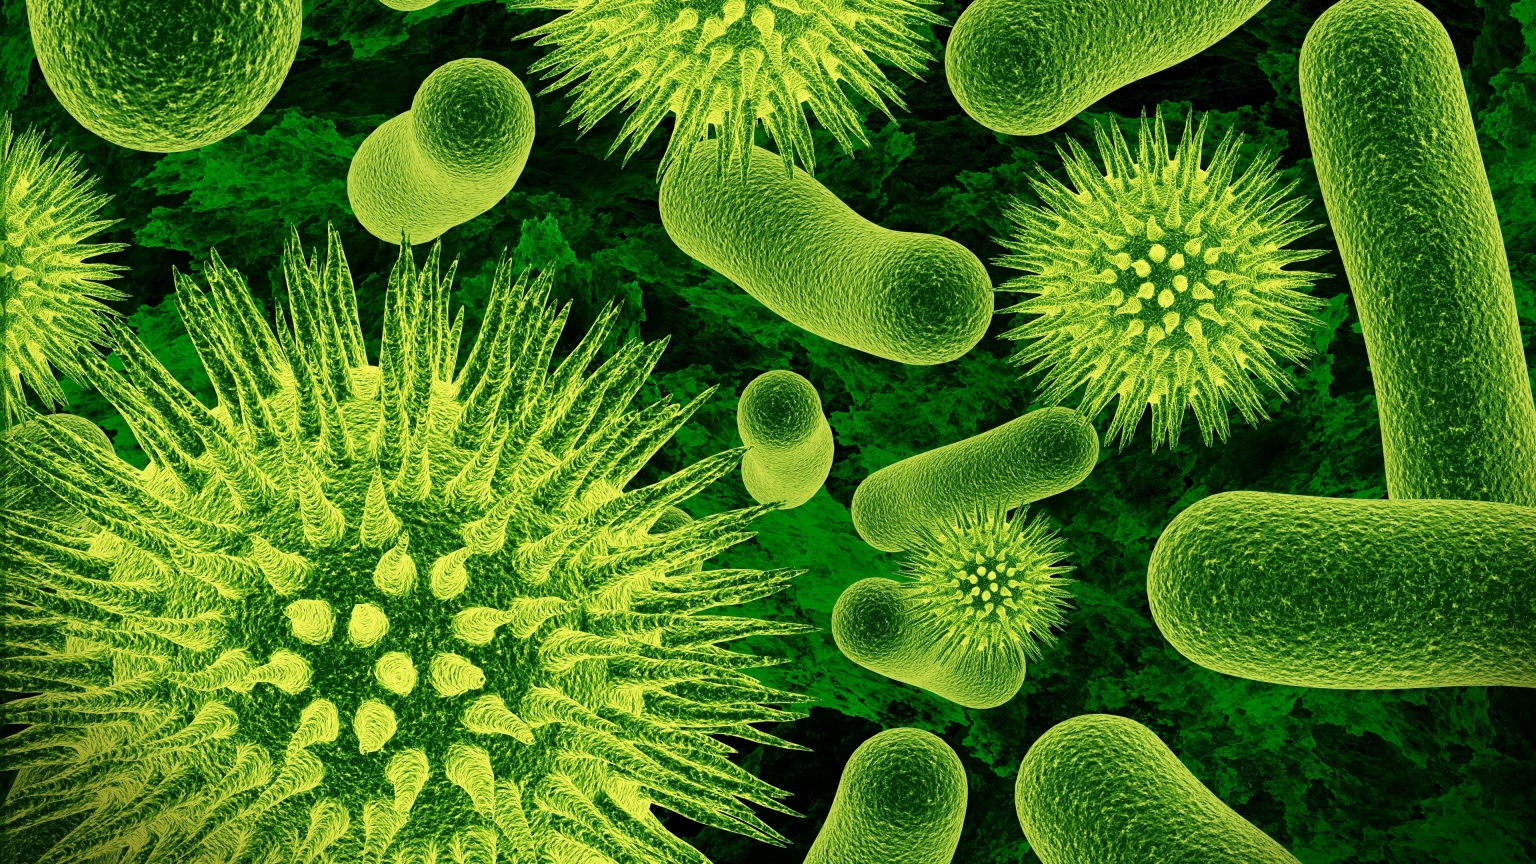 Bacteria for 1536 x 864 HDTV resolution